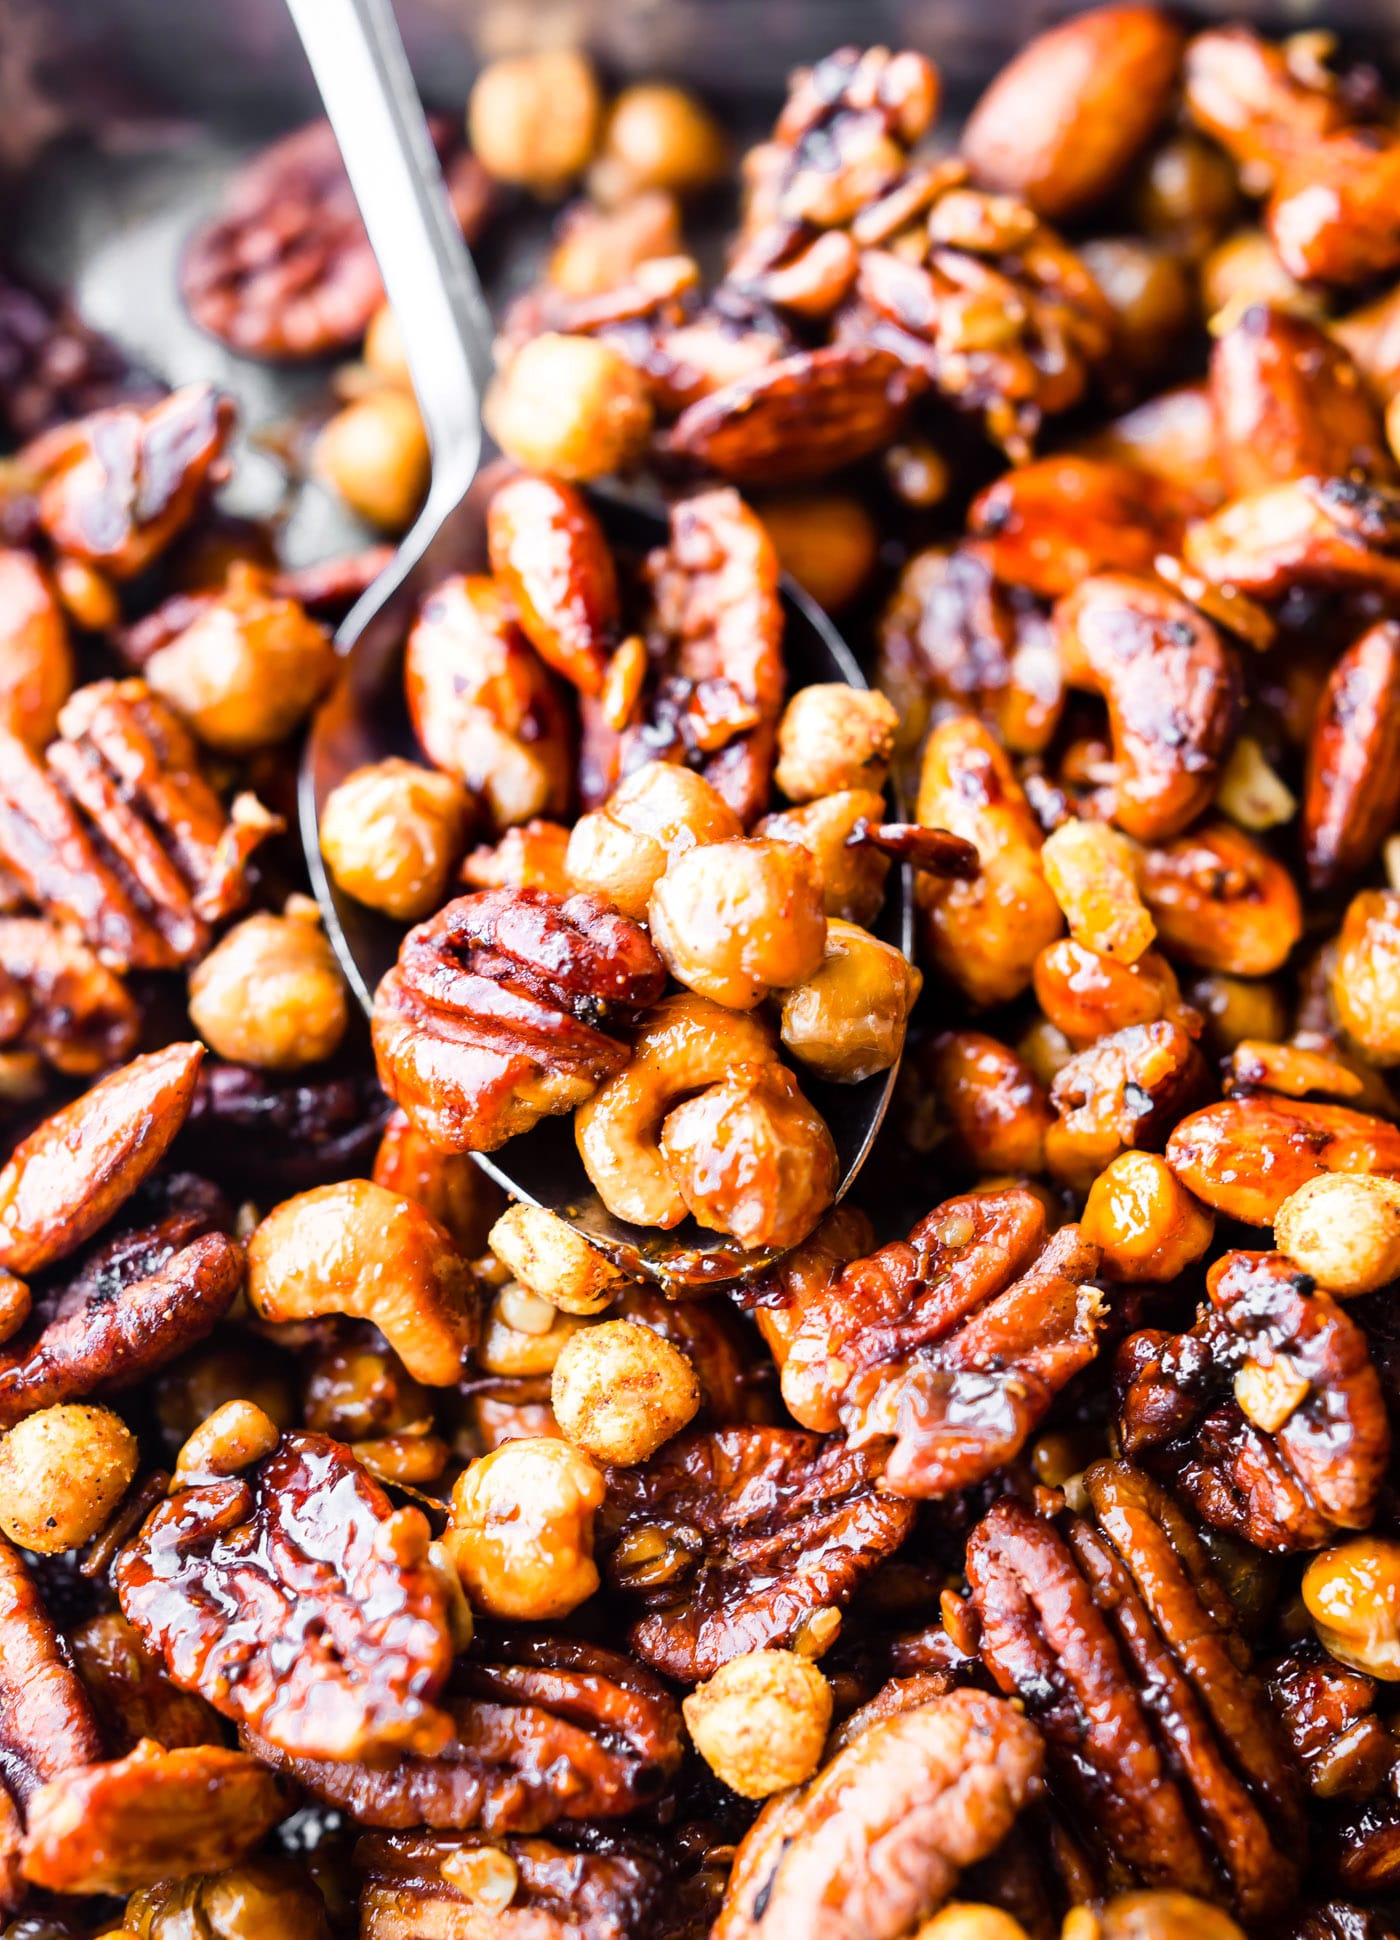 Spicy candied cajun trail mix made easy in the instant pot! What's not to love? This candied cajun trail mix is the perfect quick and healthy snack and total crowd pleaser. Cajun Spices, maple syrup, nuts, seeds, and chickpeas all cooked together then mixed with dried mango for a sweet touch. It's vegan friendly and naturally grain free!